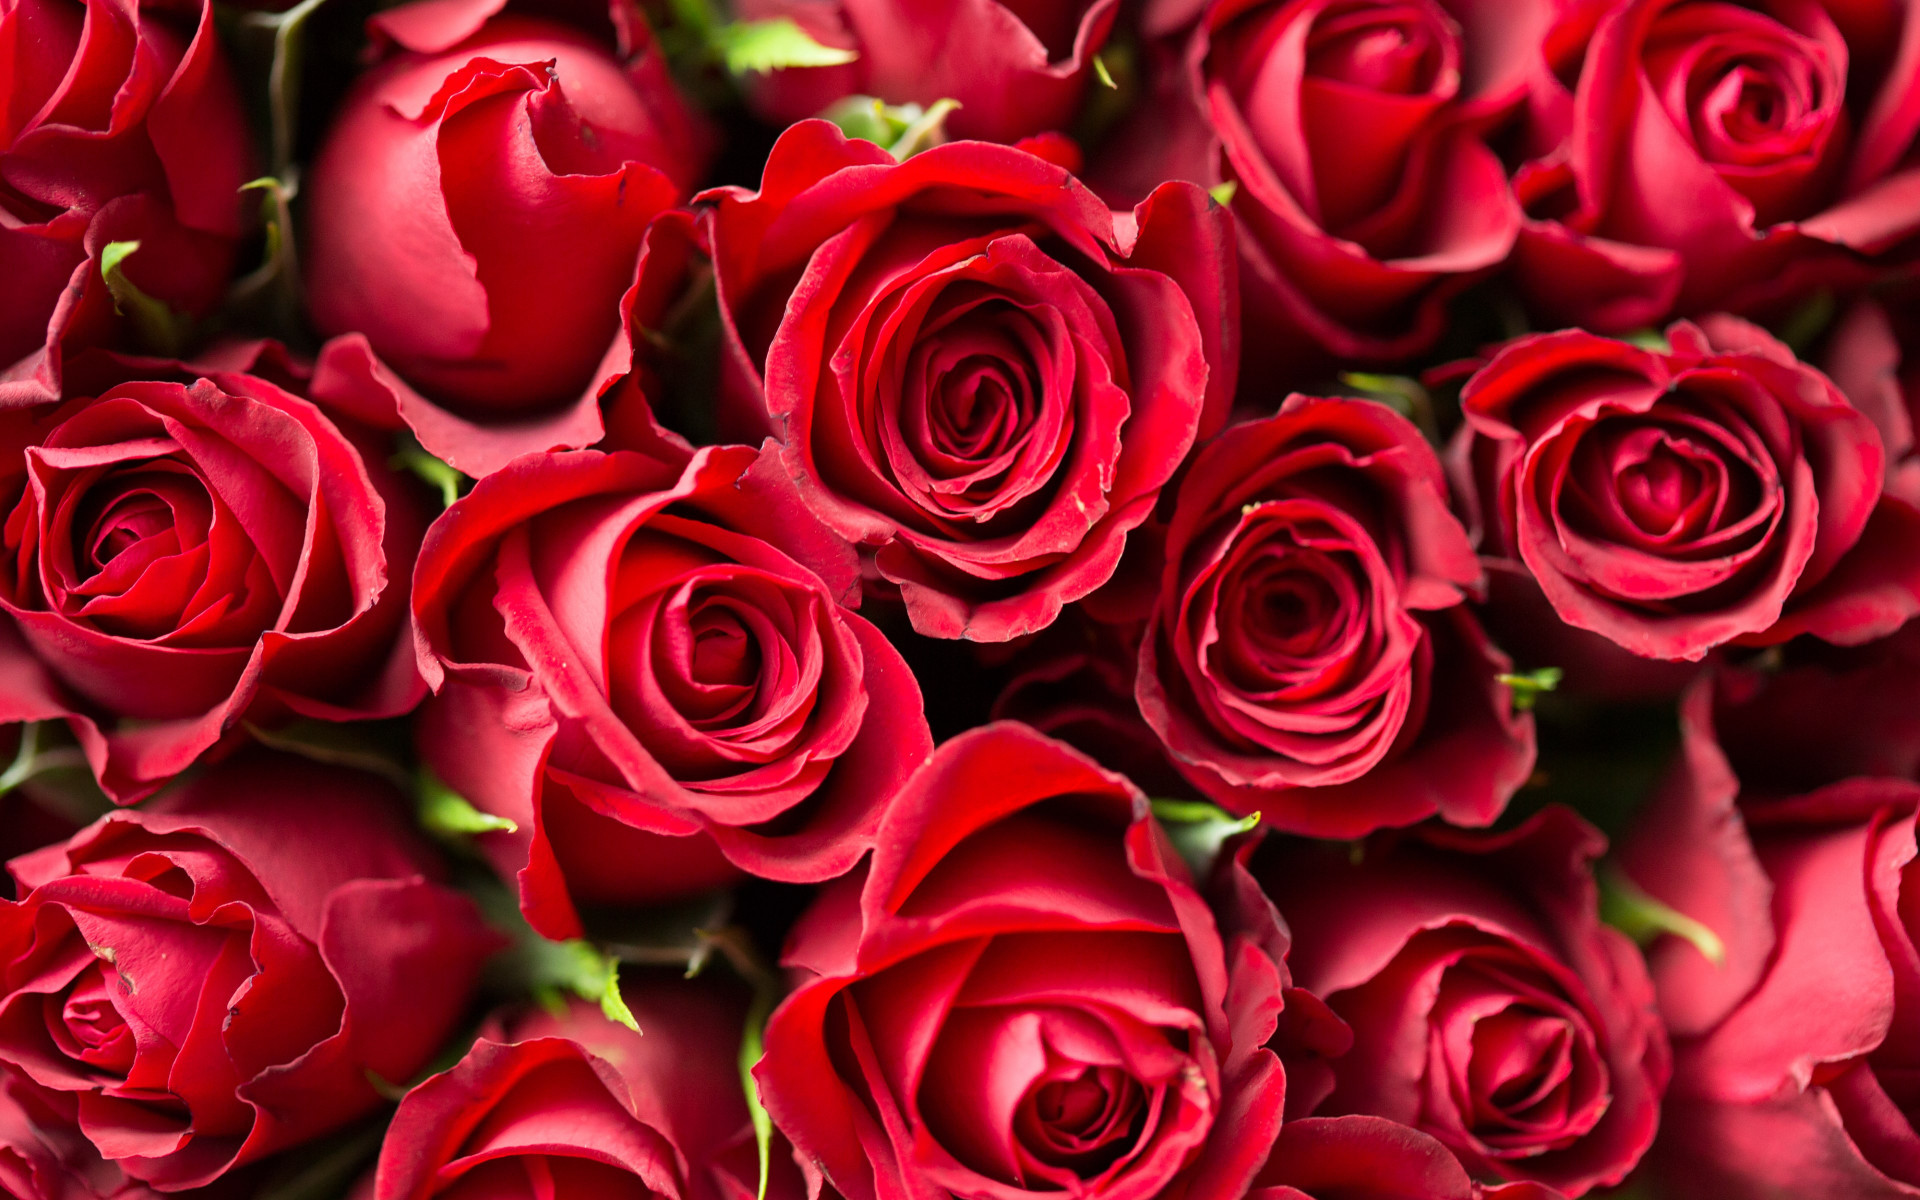 Lots of red roses wallpaper 1920x1200